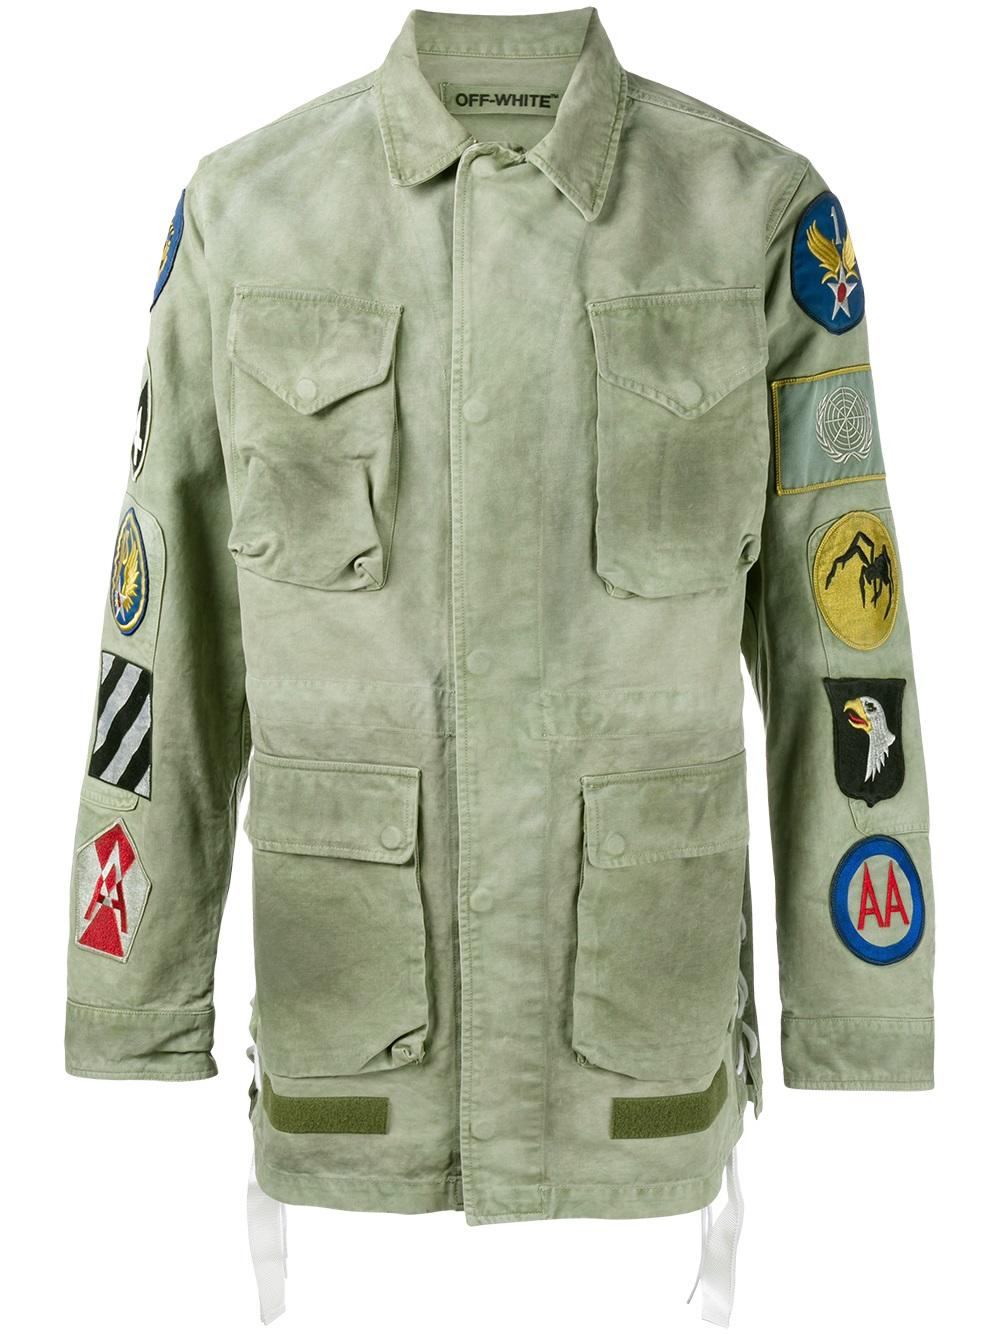 Off-White patch embellished field jacket MILITARY Men Clothing Jackets